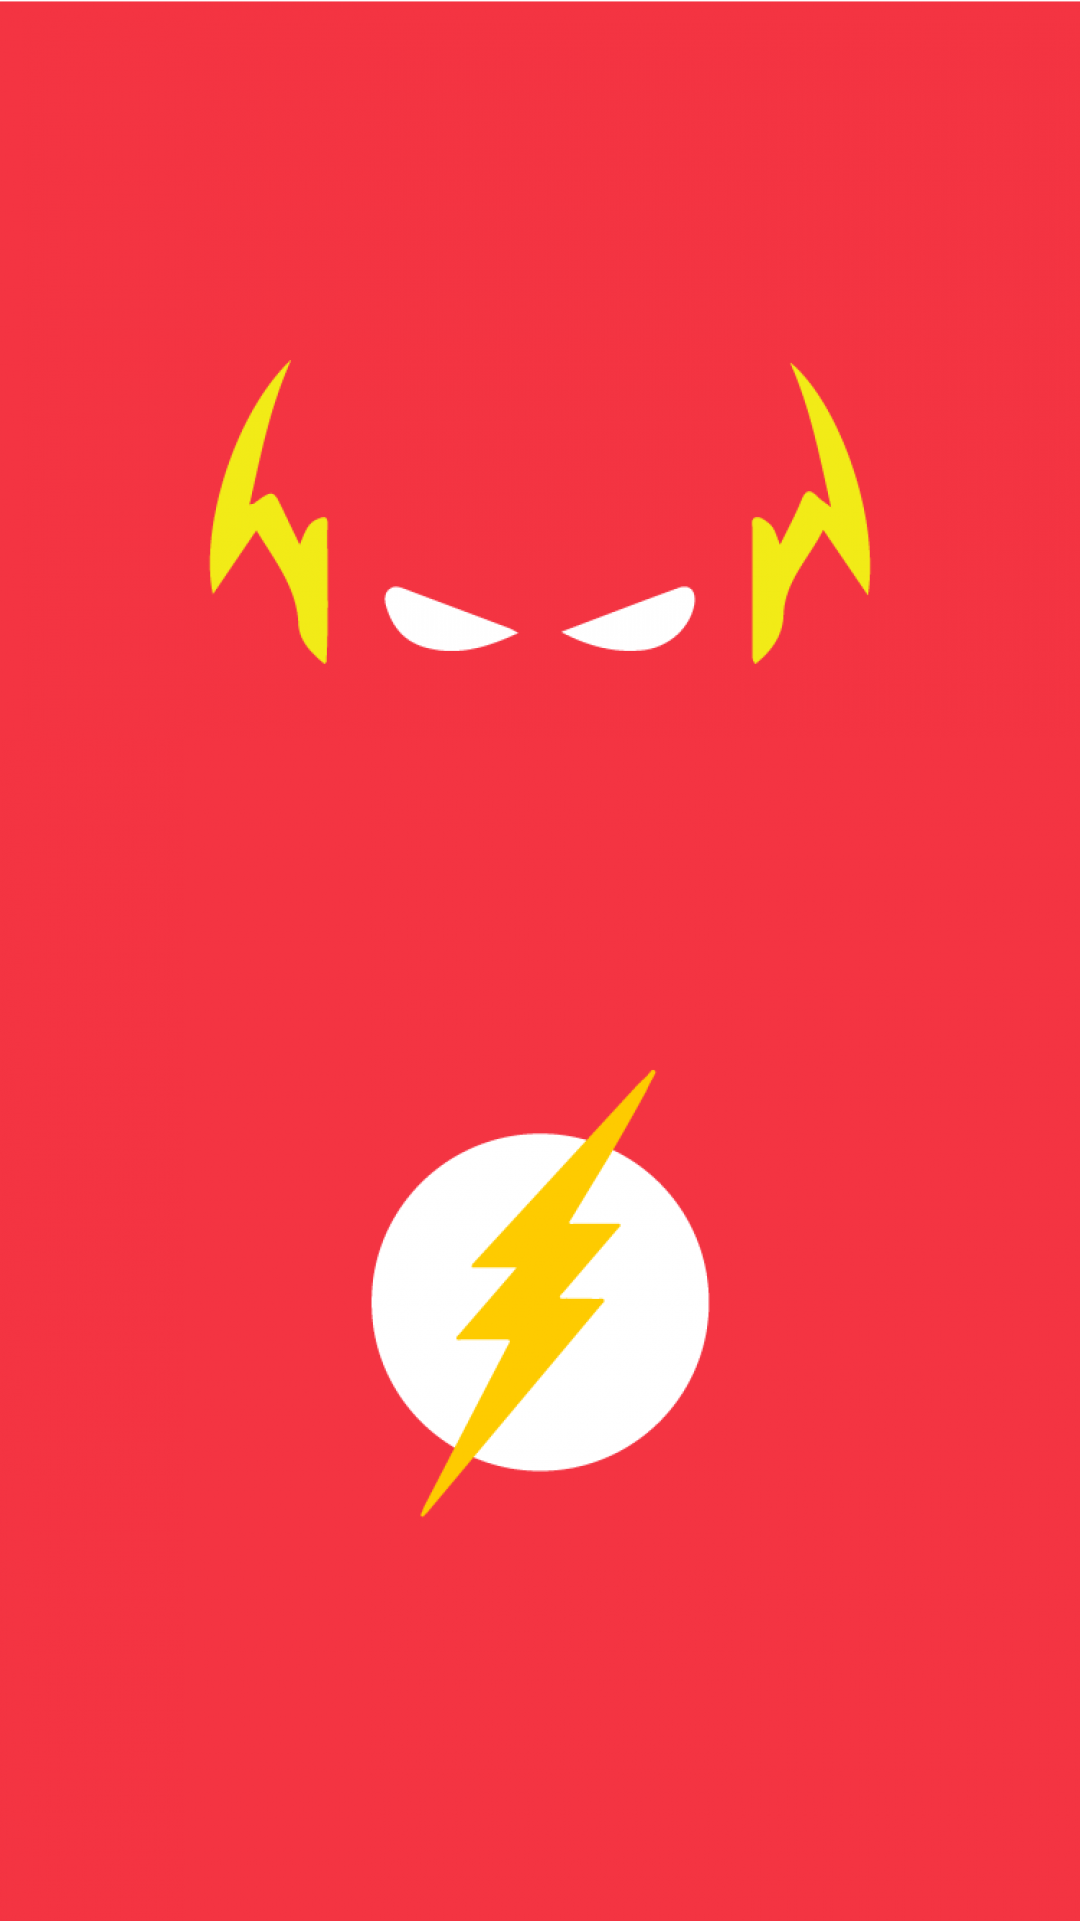 ✓[75+] The Flash wallpaper for mobile phones : FlashTV - Android / iPhone HD  Wallpaper Background Download (png / jpg) (2023)